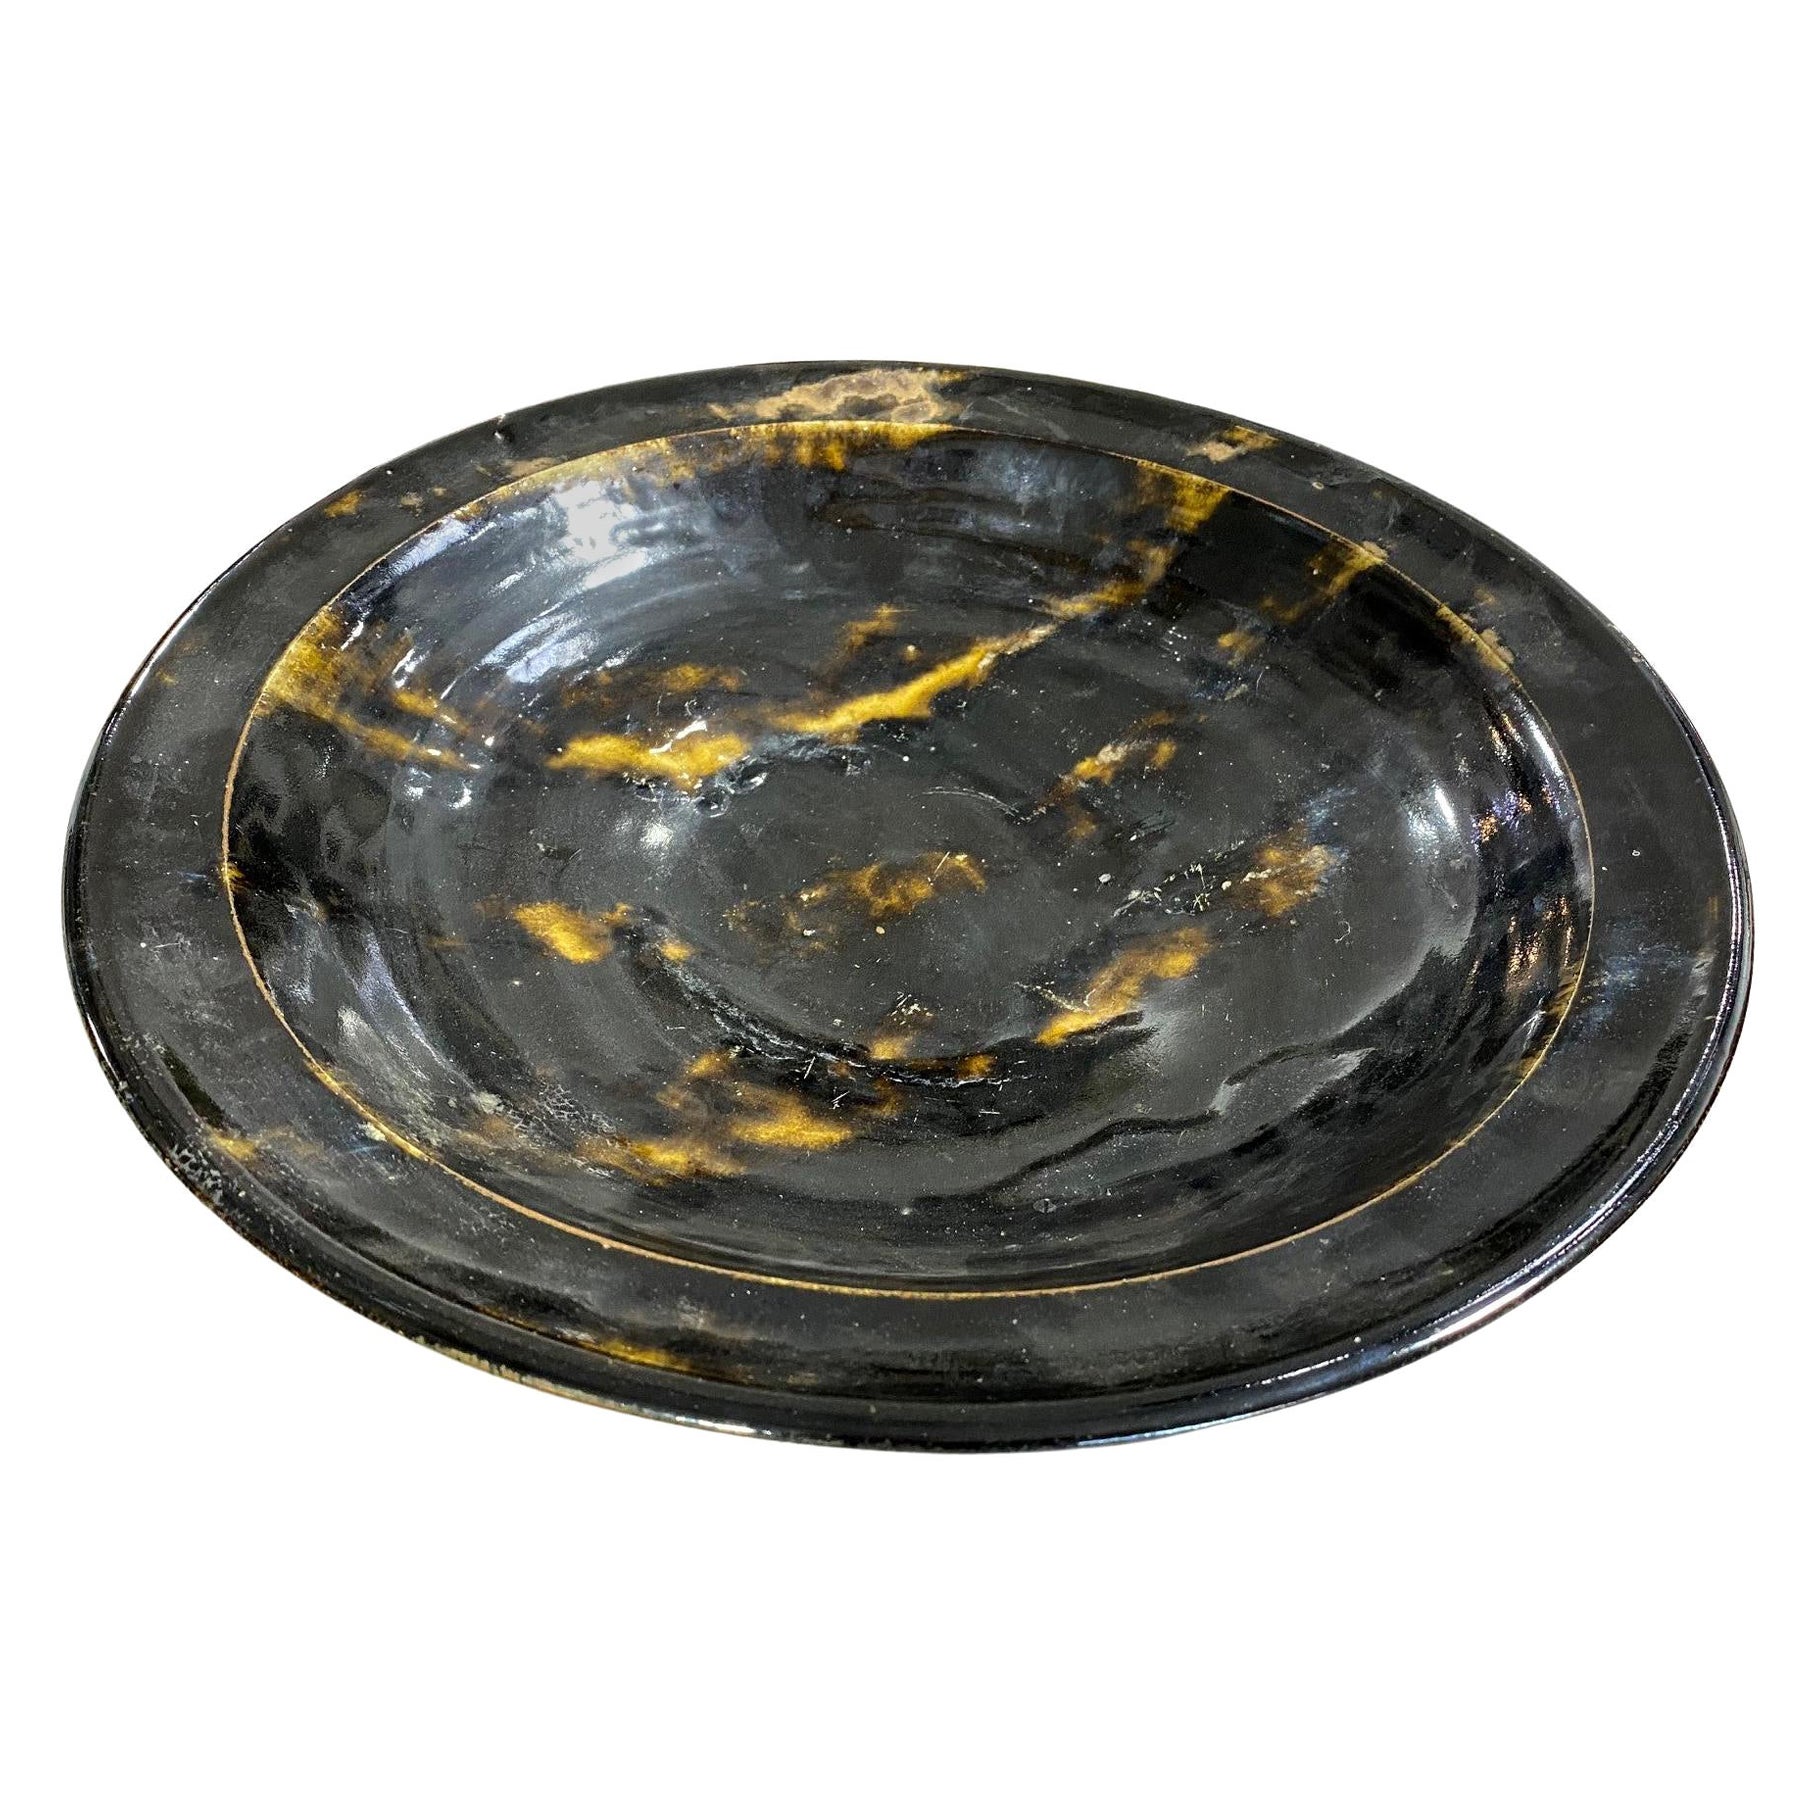 Large Japanese Pottery Charger in the Manner of Shoji Hamada and Toshiko Takaezu For Sale